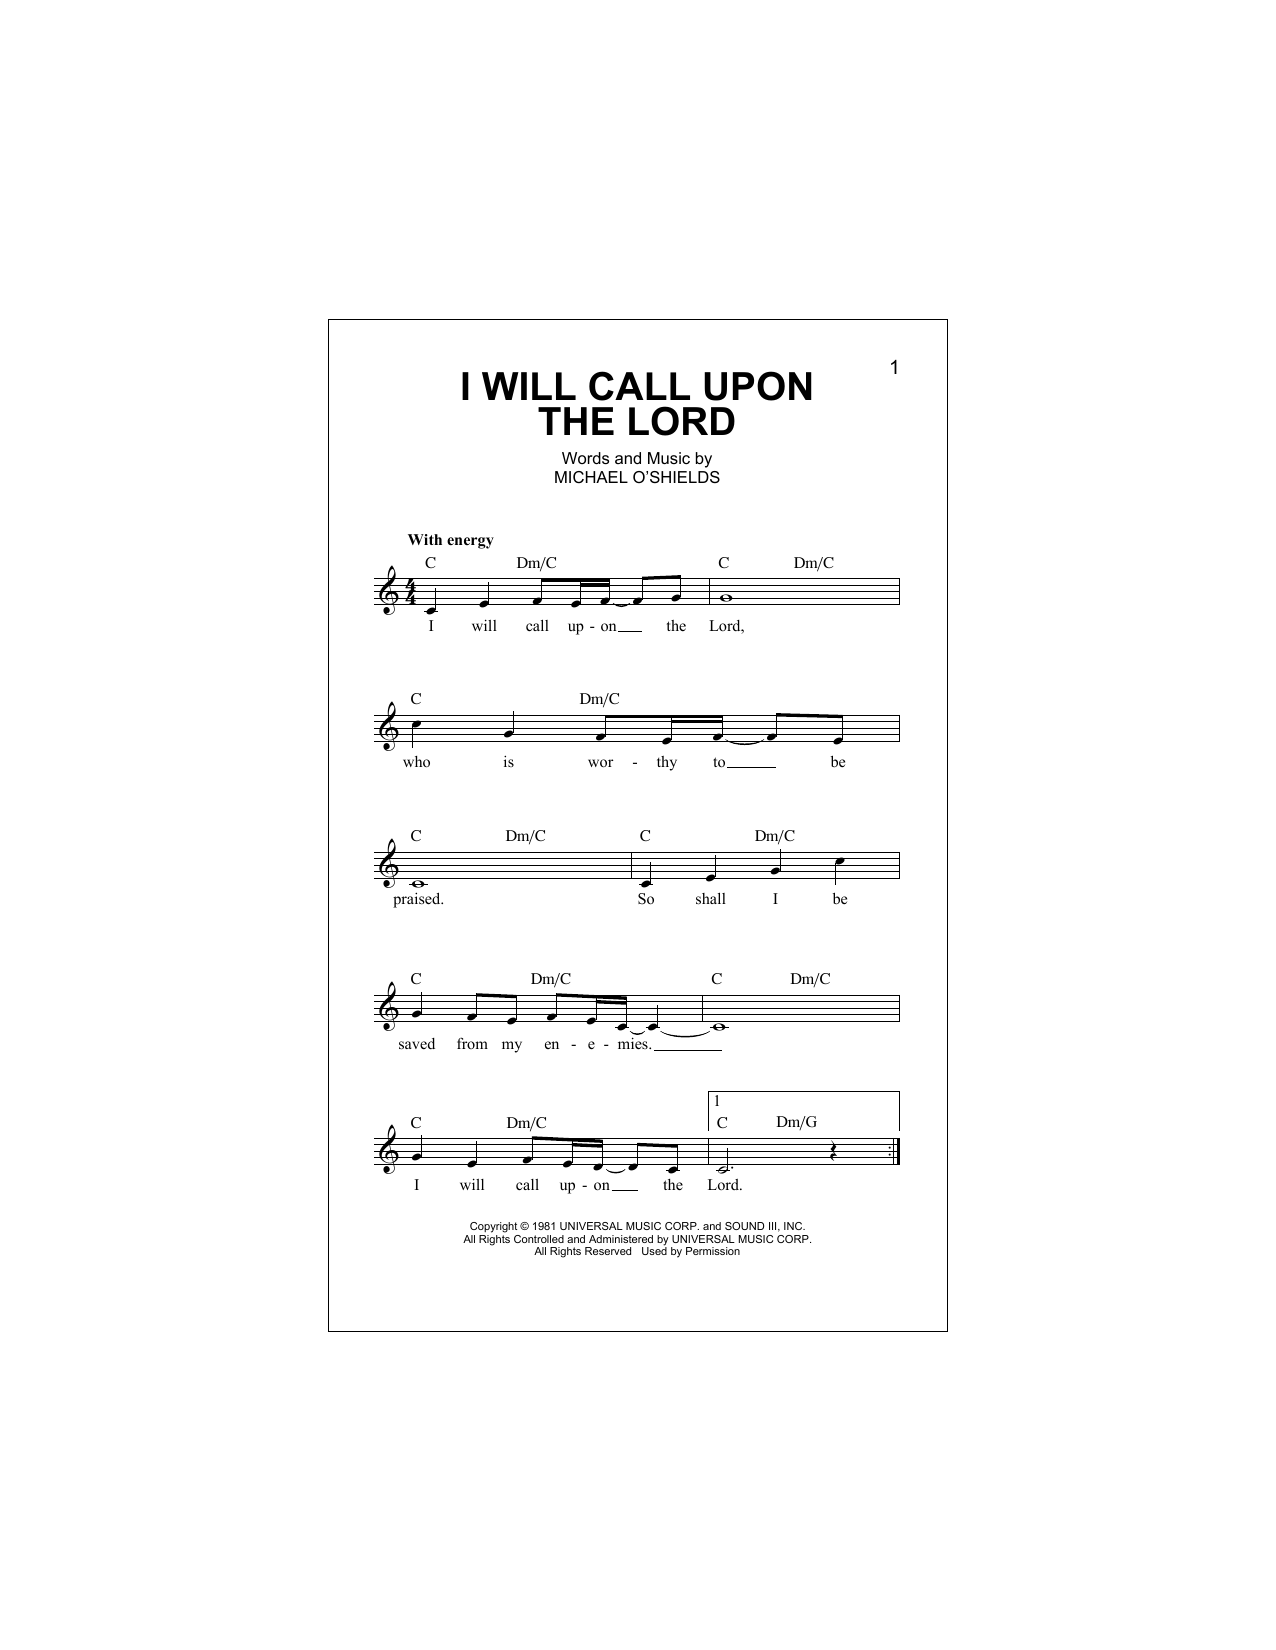 Download Michael O'Shields I Will Call Upon The Lord Sheet Music